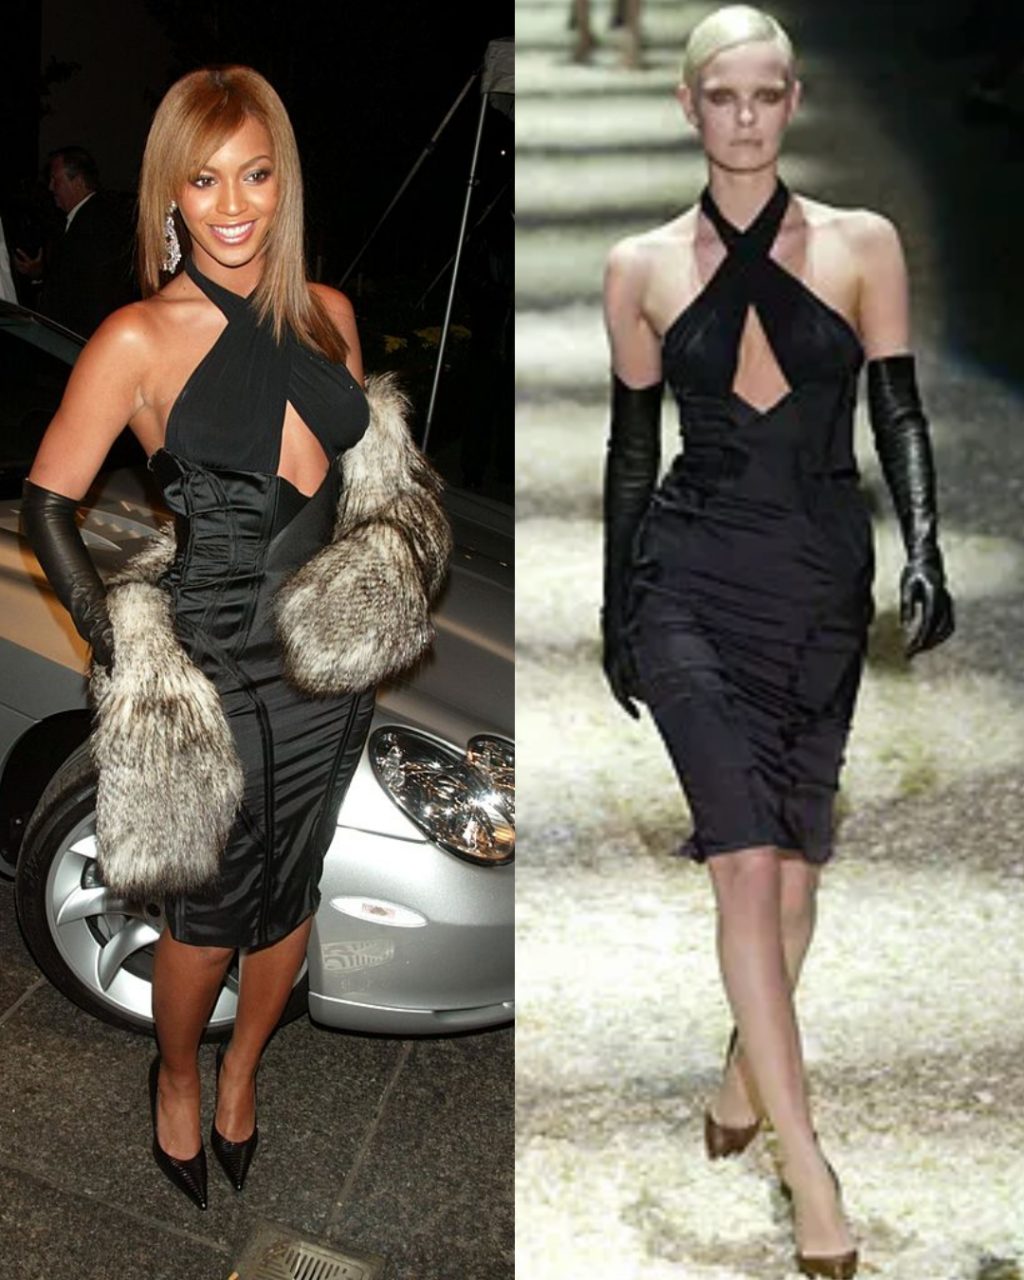 Great Outfits in Fashion History: Eve in Tom Ford-Era Gucci